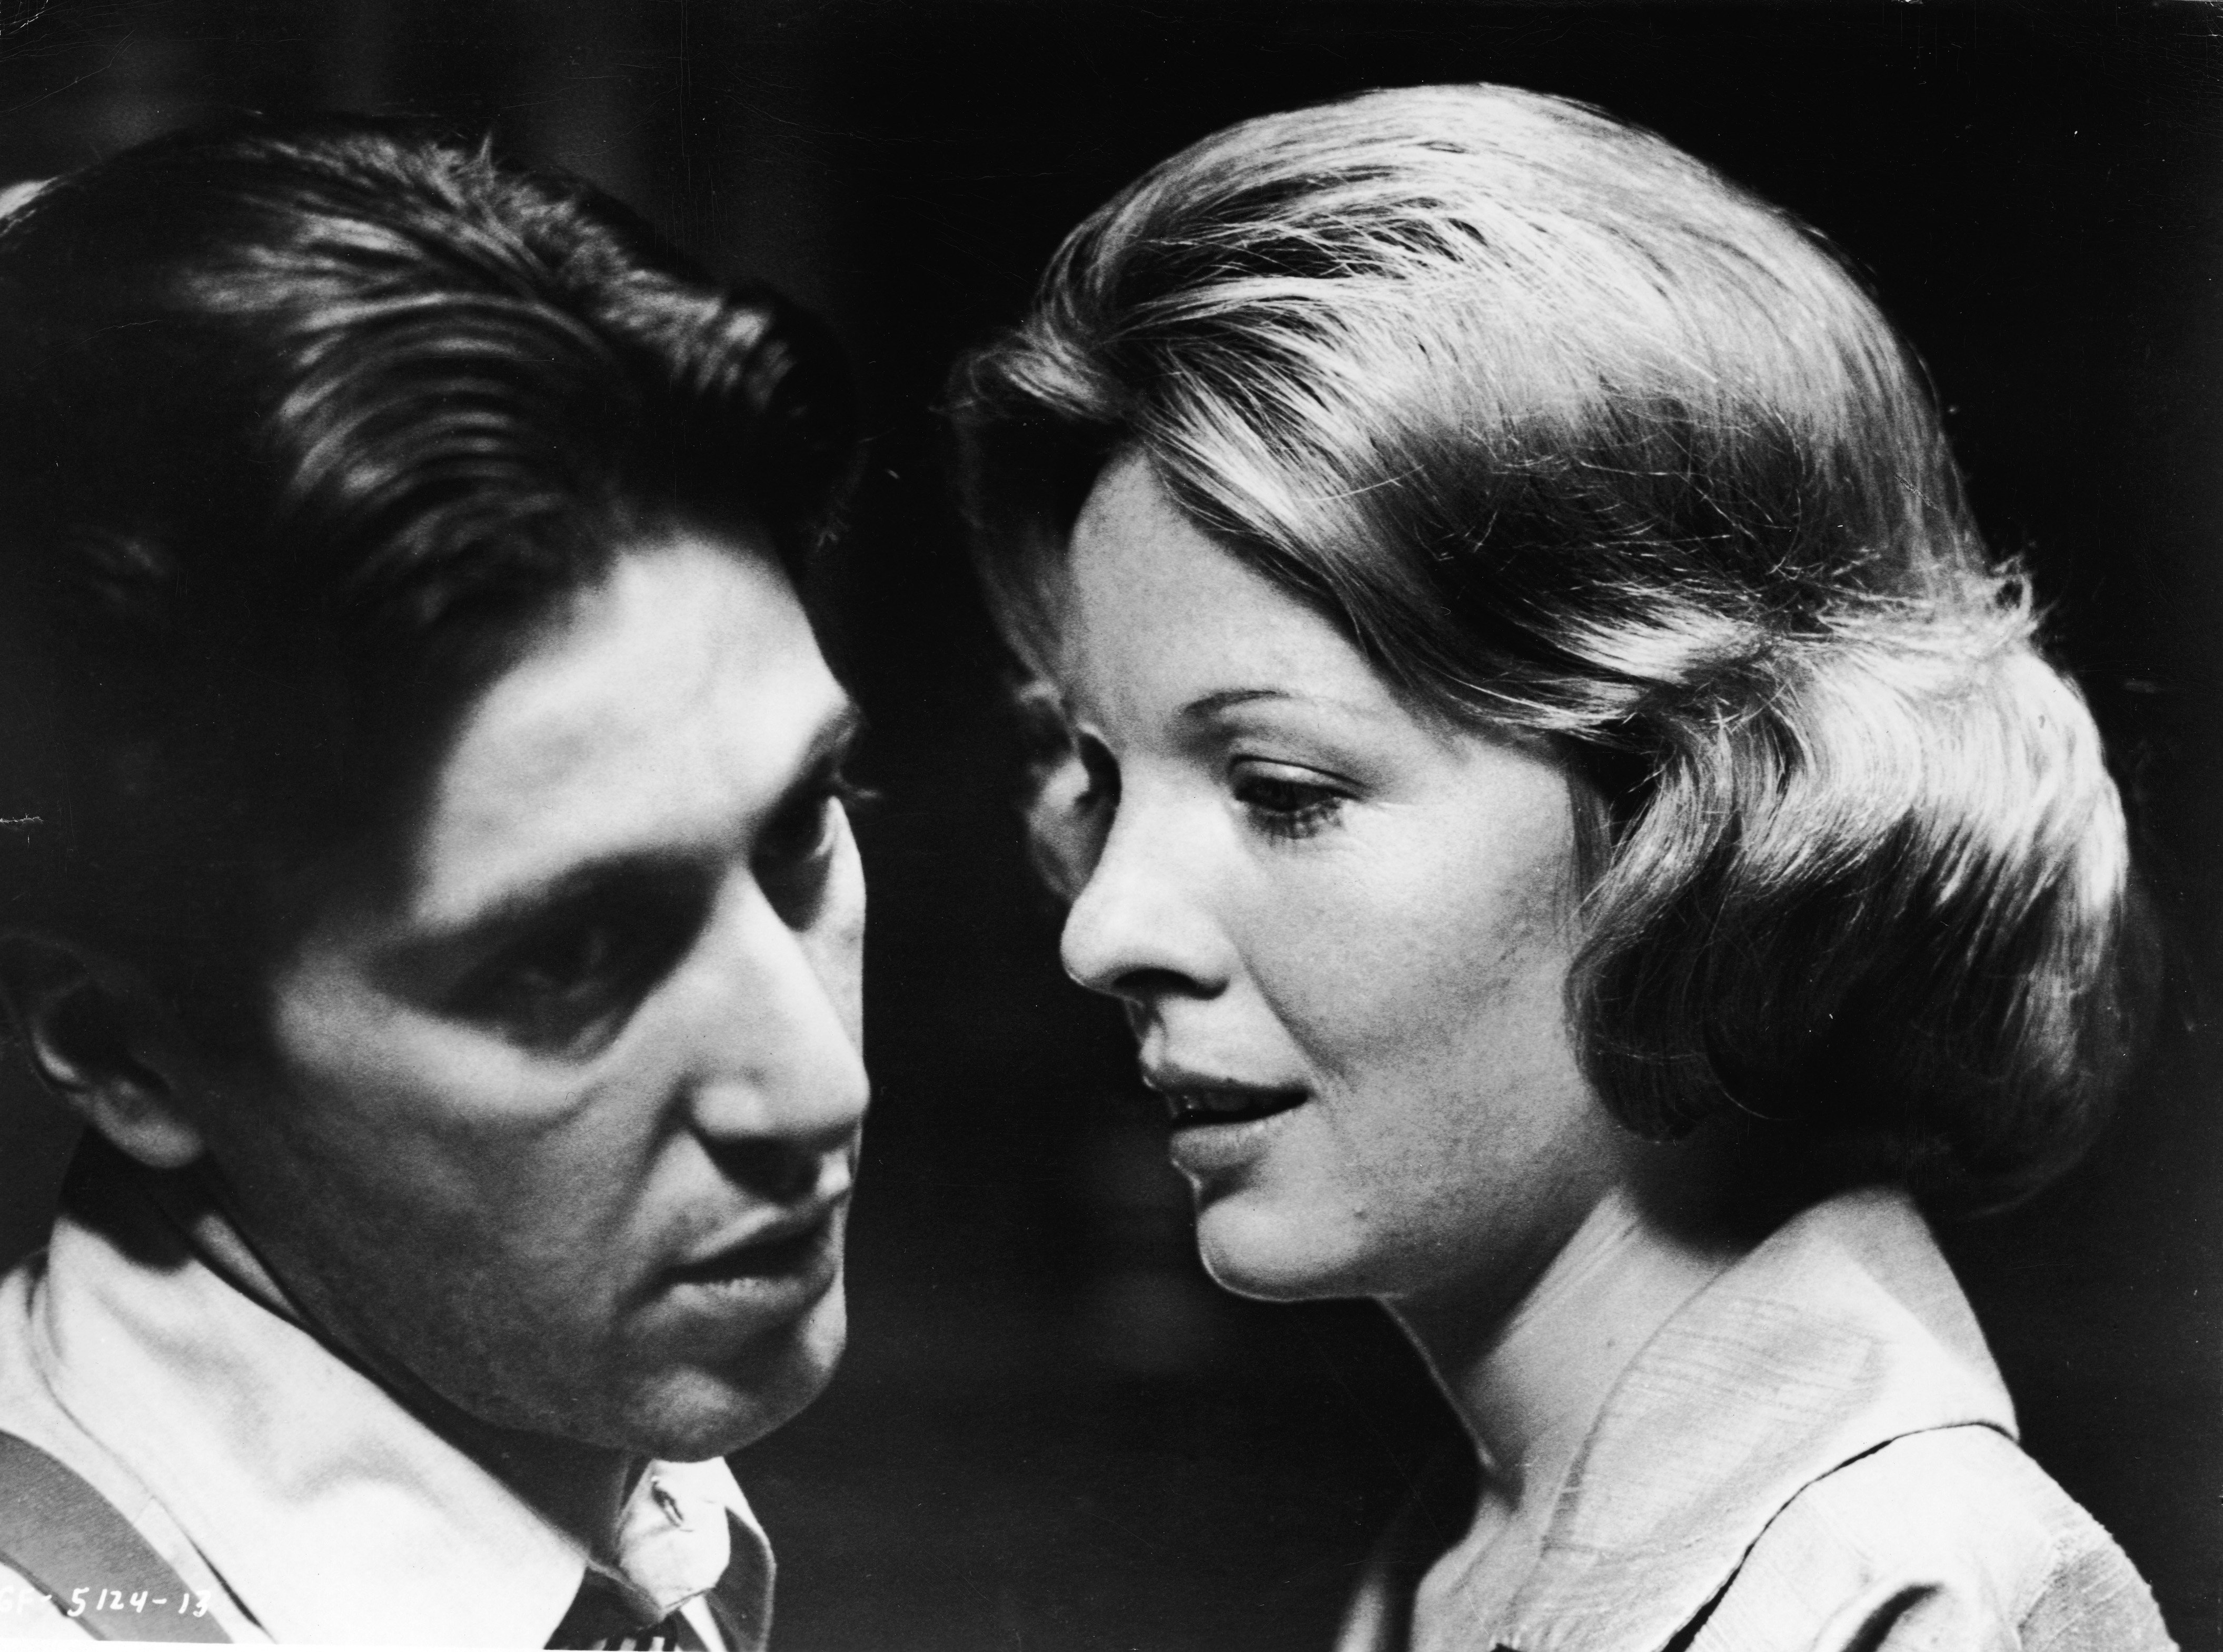 Al Pacino and Diane Keaton in a scene from "The Godfather," directed by Francis Ford Coppola in 1972 | Source: Getty Images